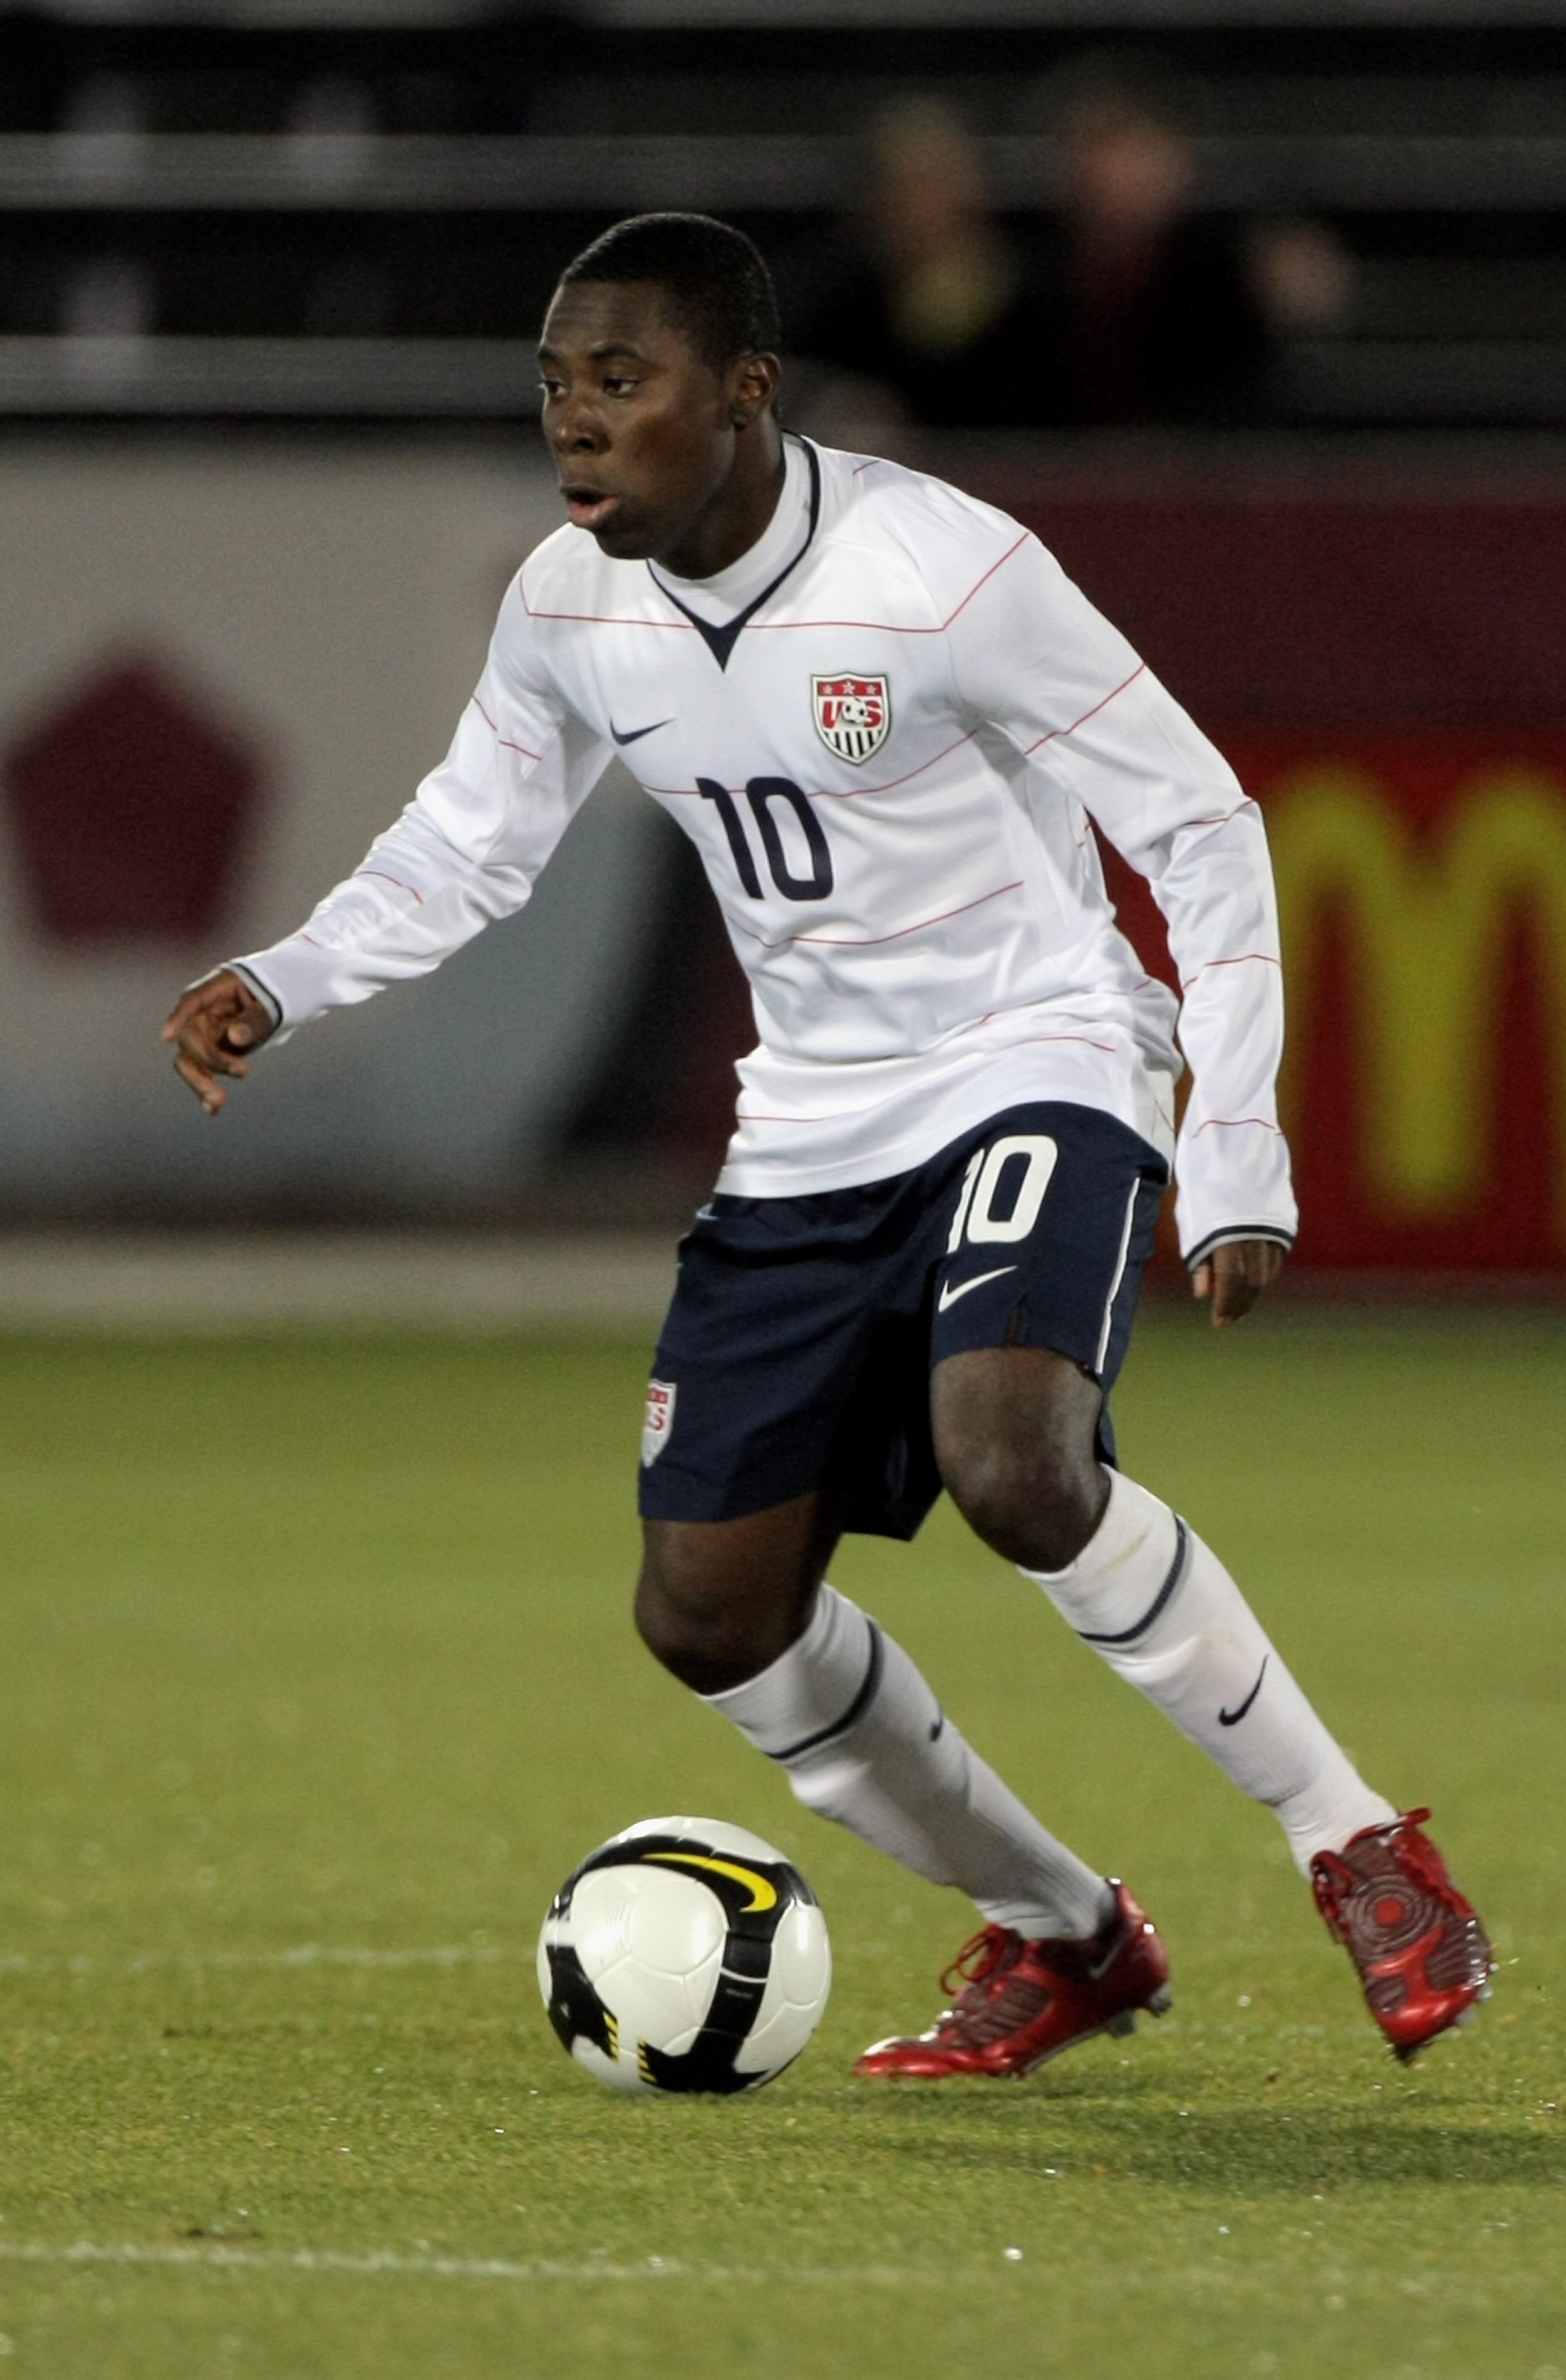 COMMERCE CITY, CO - NOVEMBER 19:  Freddy Adu #10 of the USA controls the ball against Guatemala during their semifinal round FIFA World Cup qualifier match at Dick's Sporting Goods Park on November 19, 2008 in Commerce City, Colorado. USA defeated Guatema